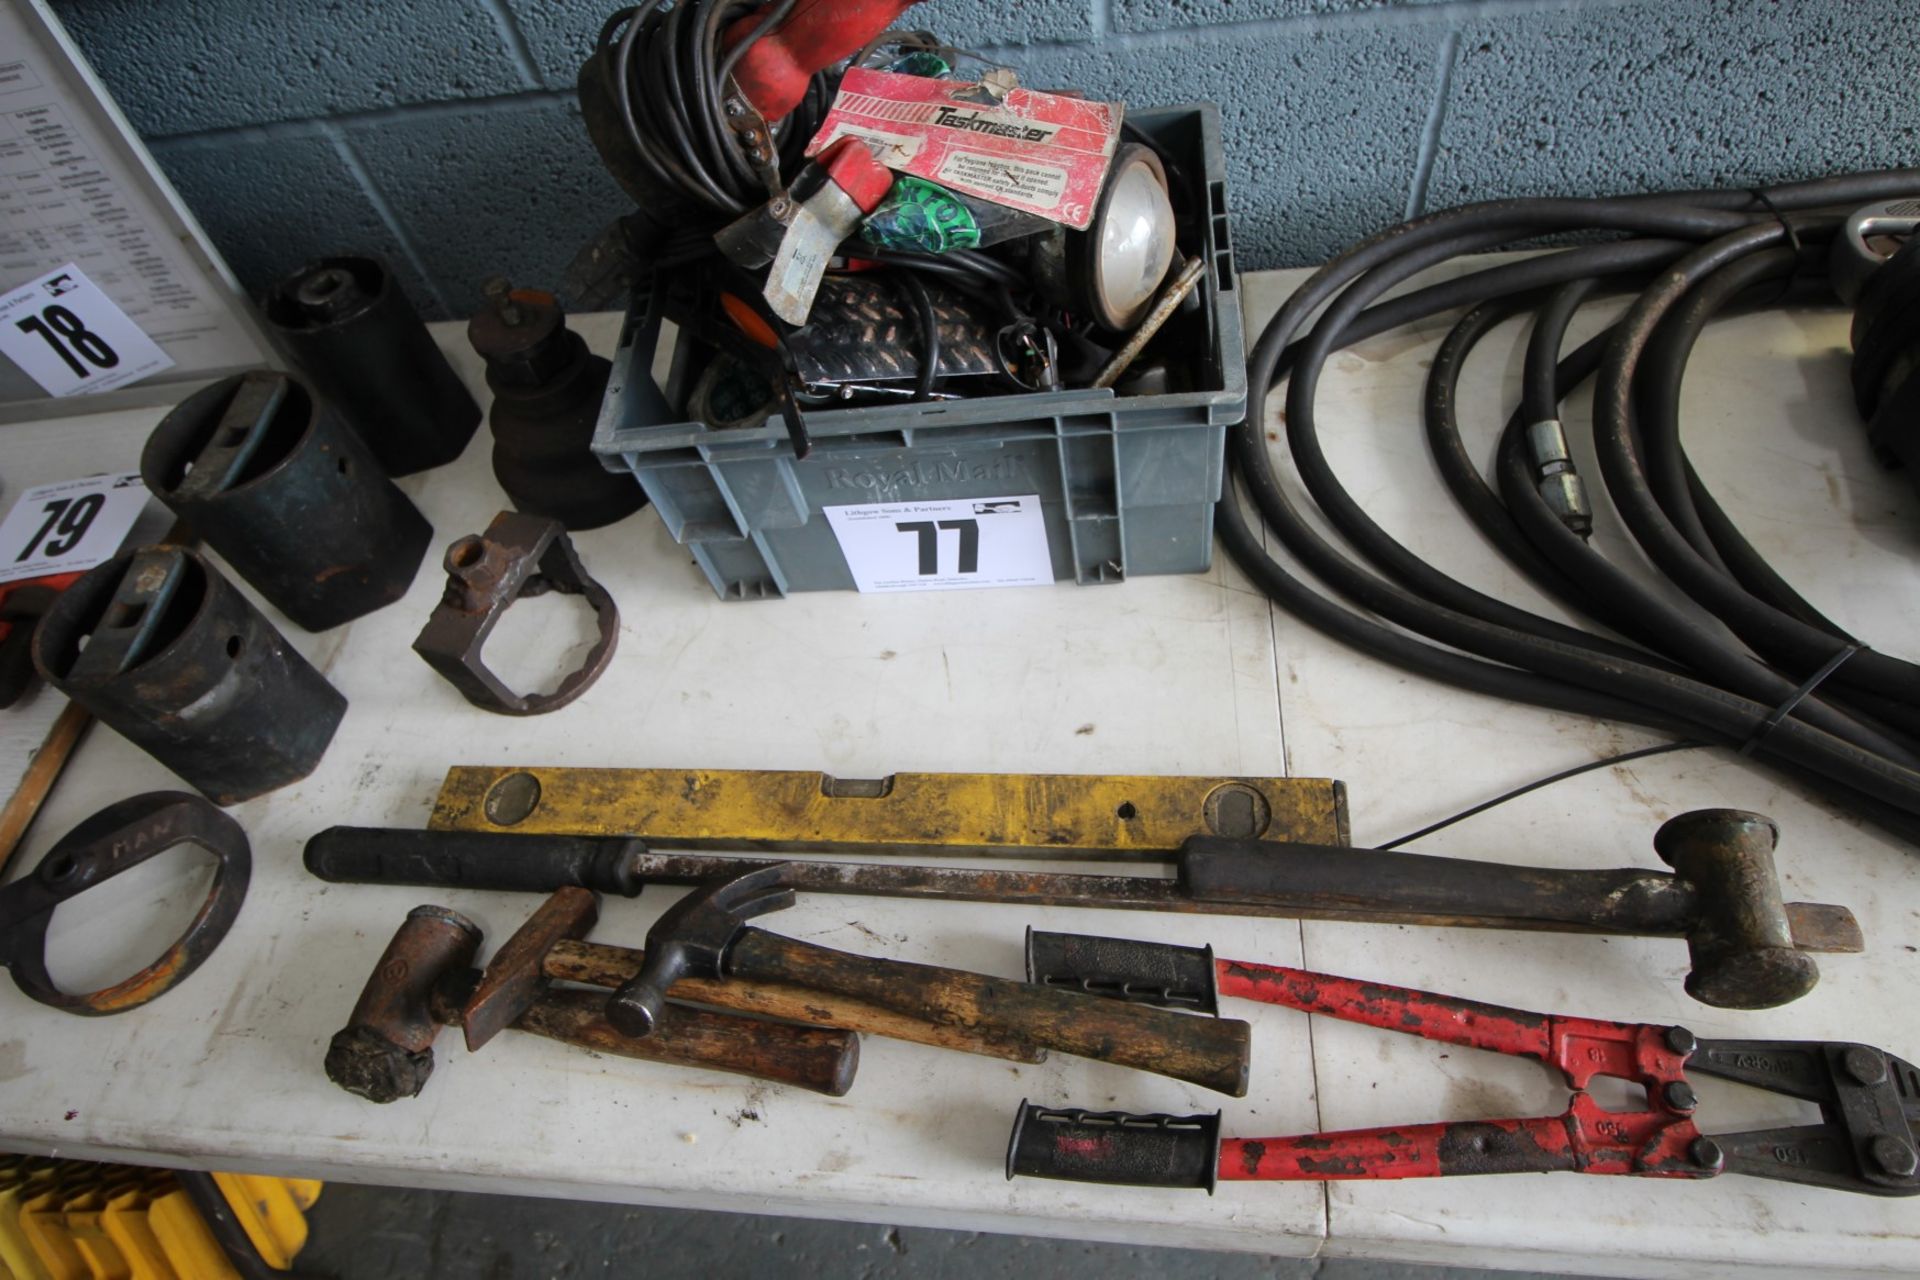 REMAINDER ON TABLE INC. OVERSIZE SOCKETS, INSPECTION LIGHTS, HAMMERS & HAND TOOLS